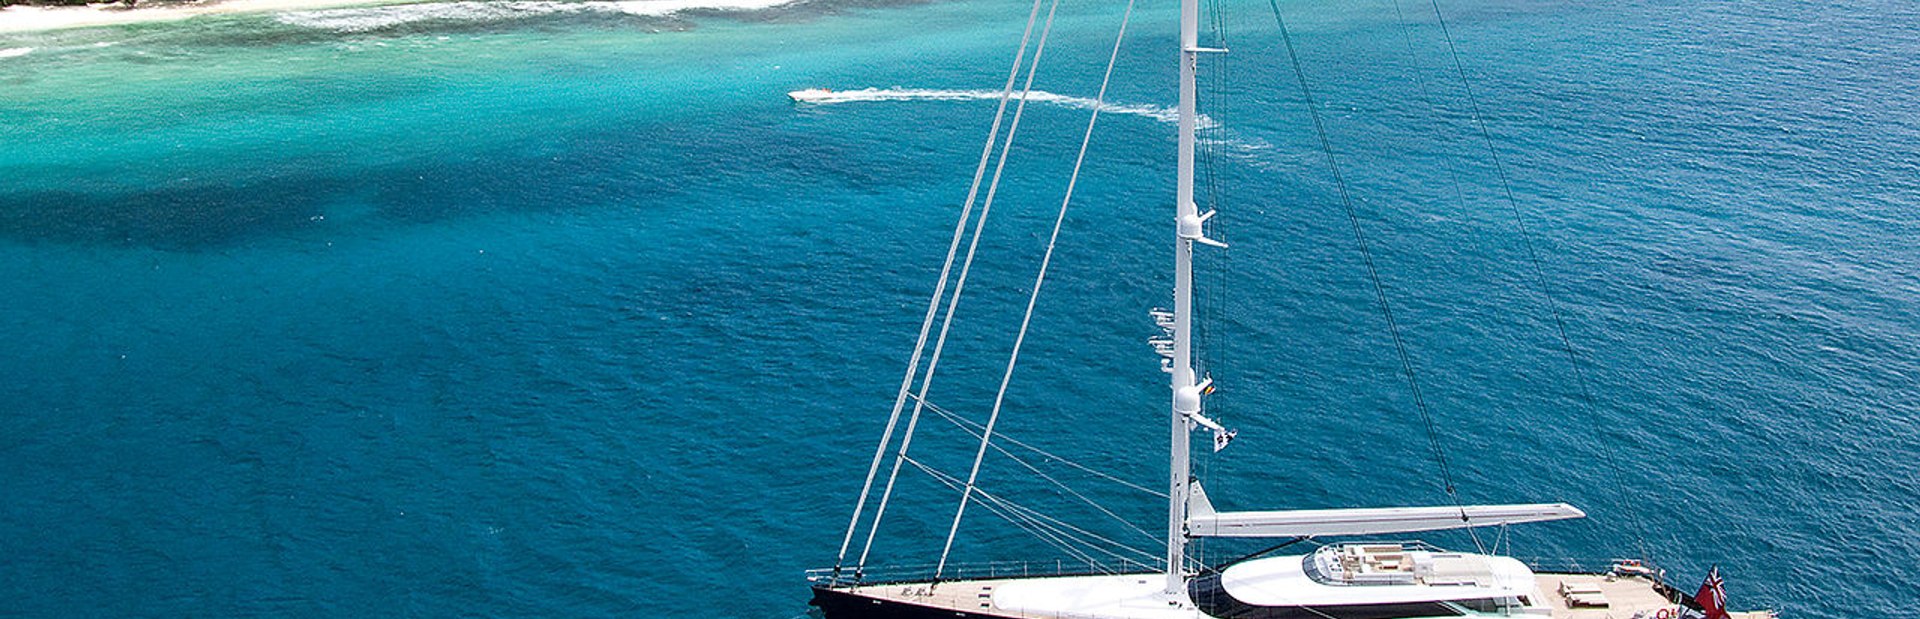 An Allloy Yachts charter superyacht at anchore off tropical island